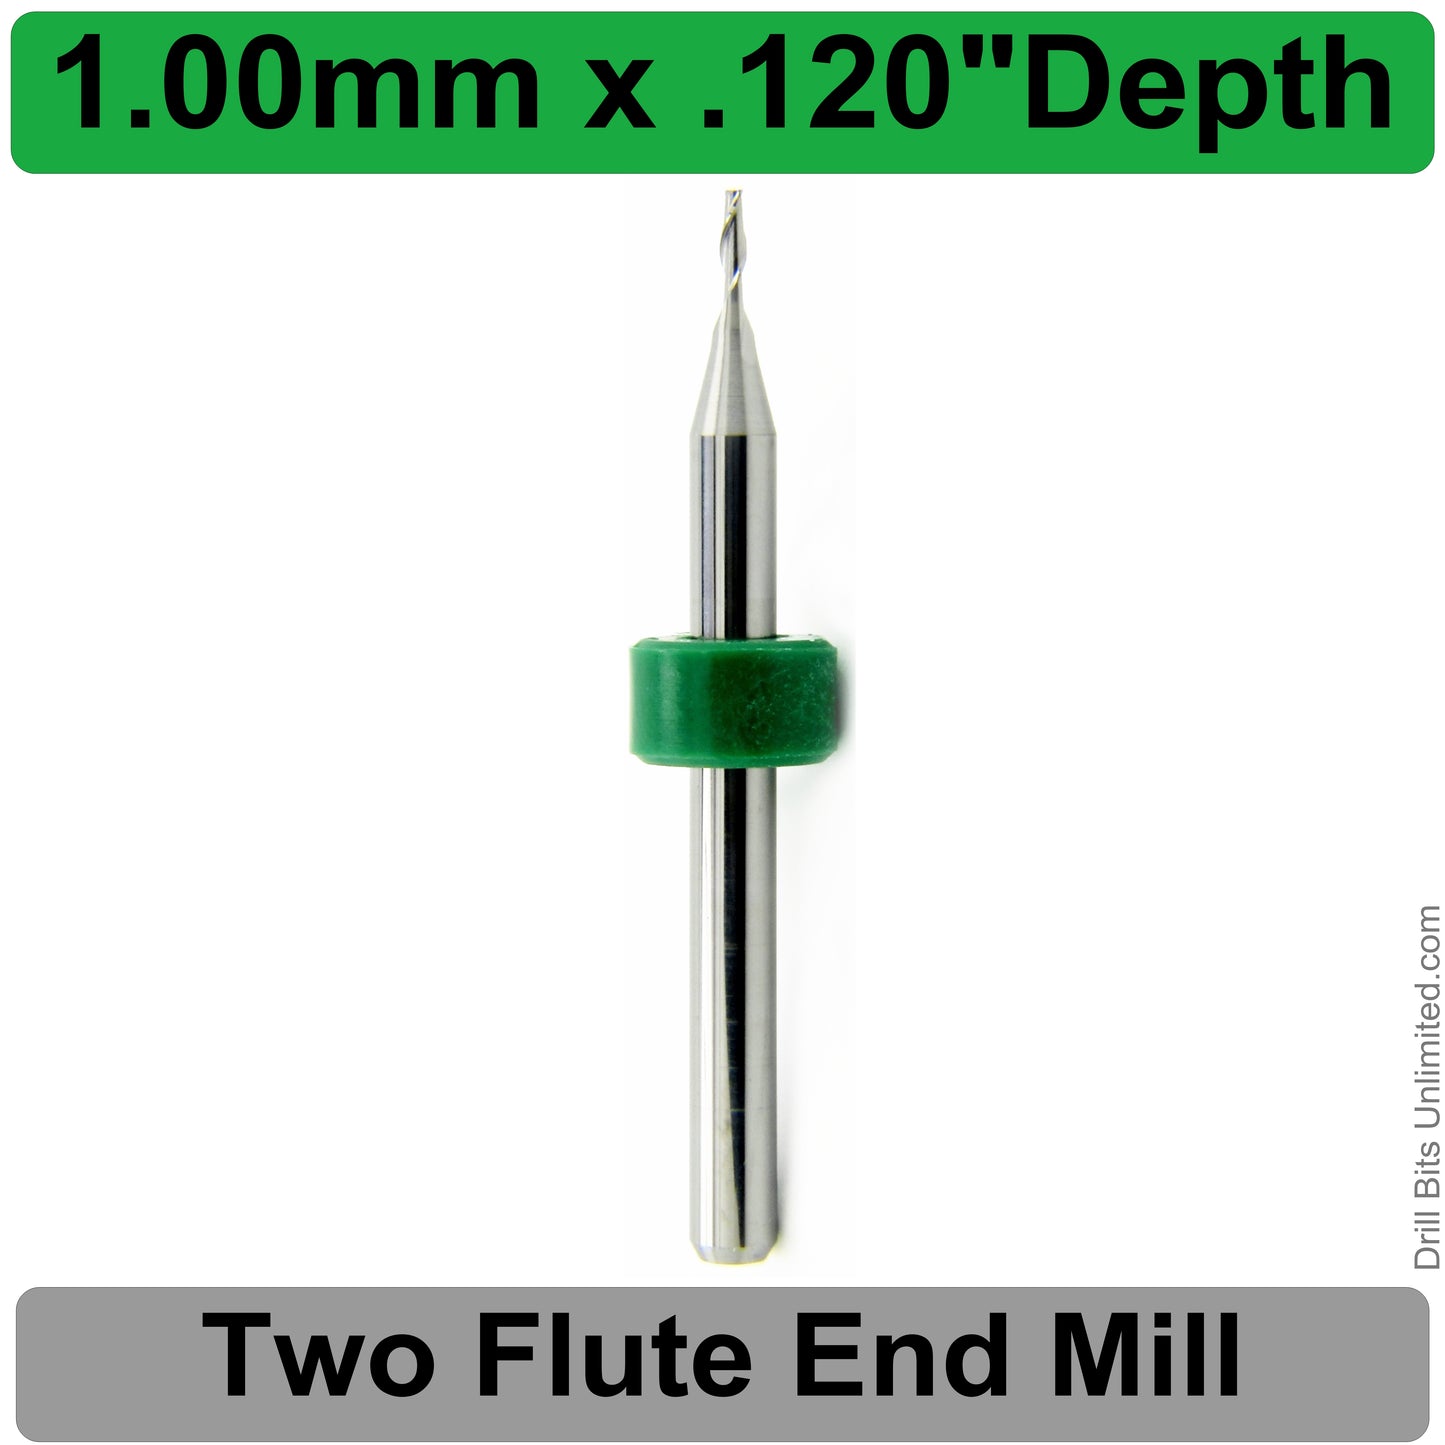 1.00mm x .120" LOC Two Flute UP Cut Carbide End Mill Square End - Made in U.S.A. M109